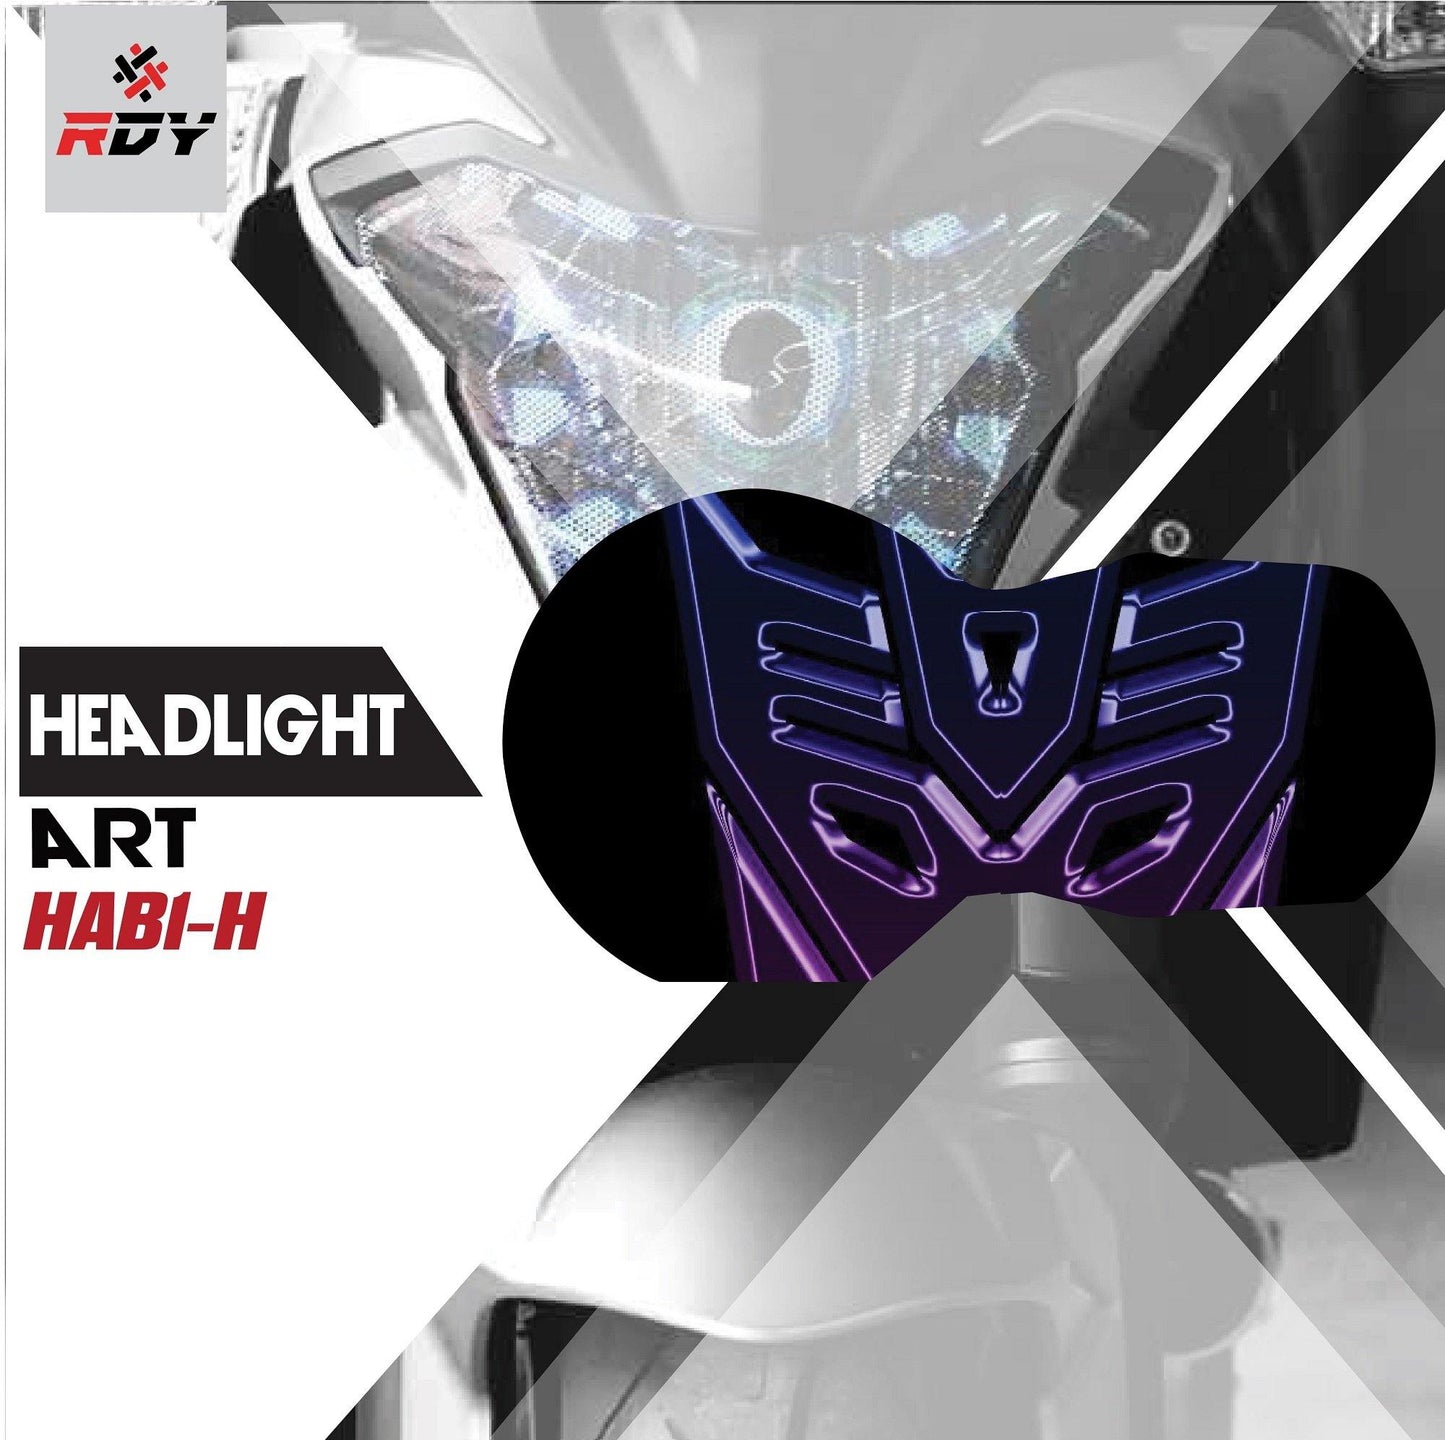 RDY Headlight Art fits for BMW R1000GS - Durian Bikers